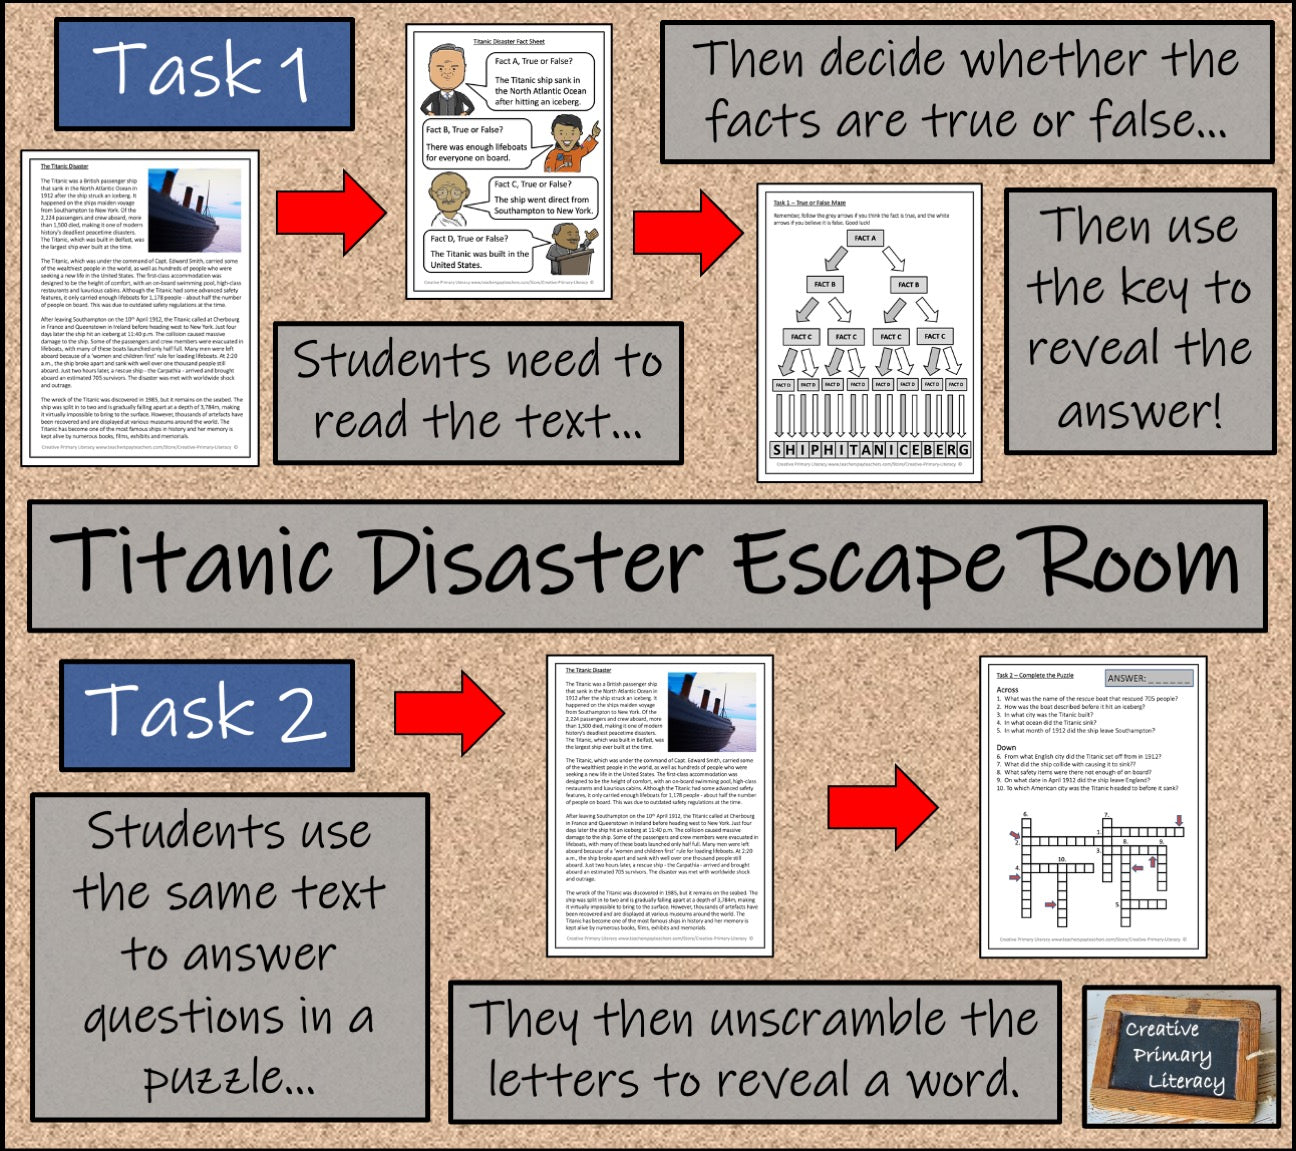 The Titanic Disaster Escape Room Activity